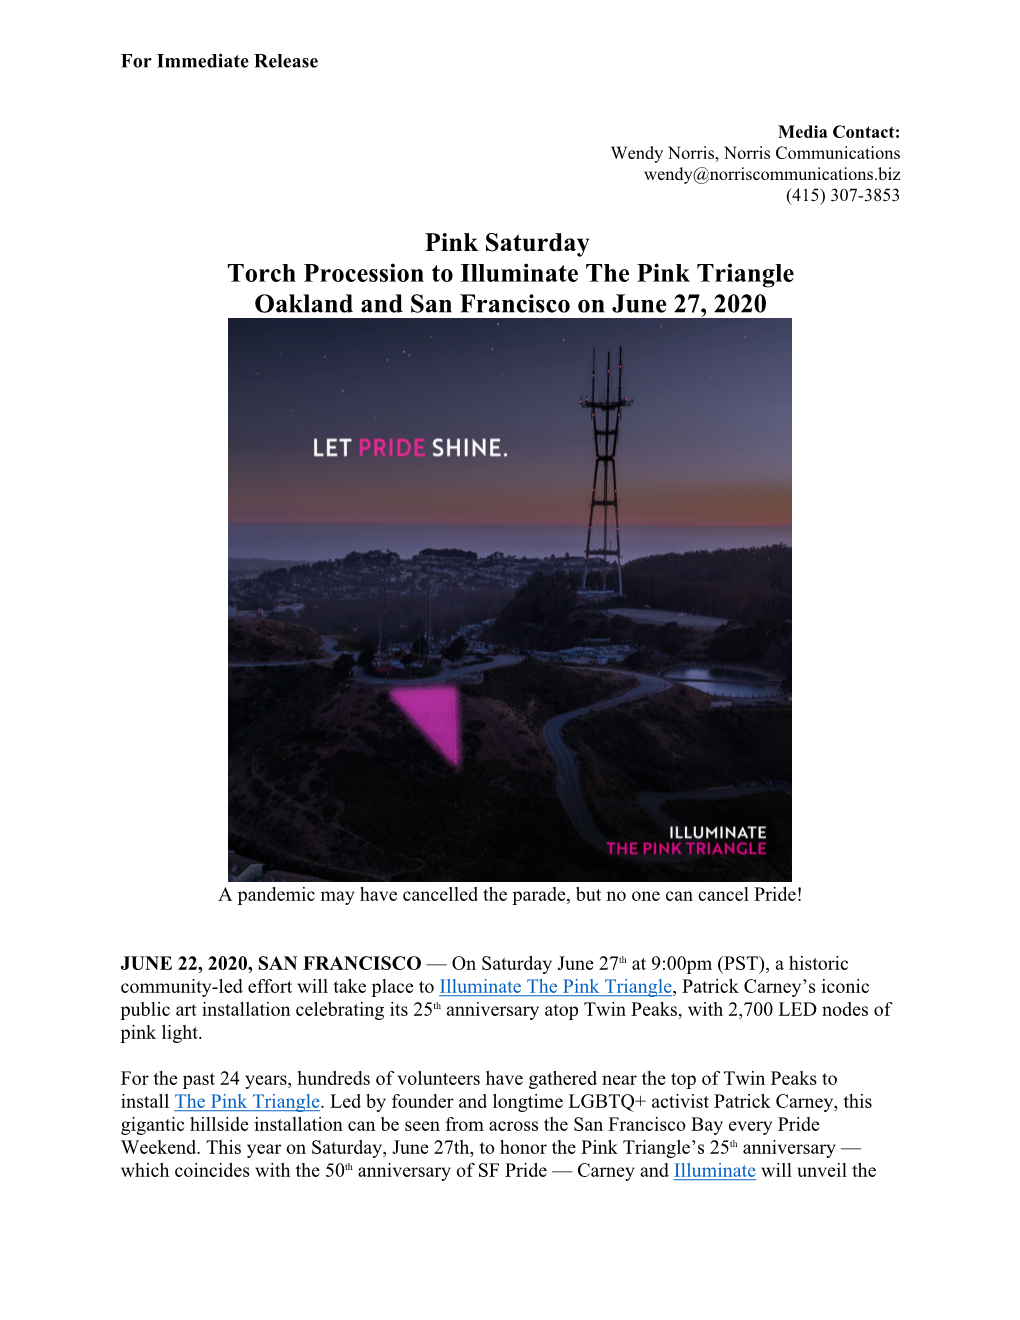 Pink Saturday Torch Procession to Illuminate the Pink Triangle Oakland and San Francisco on June 27, 2020